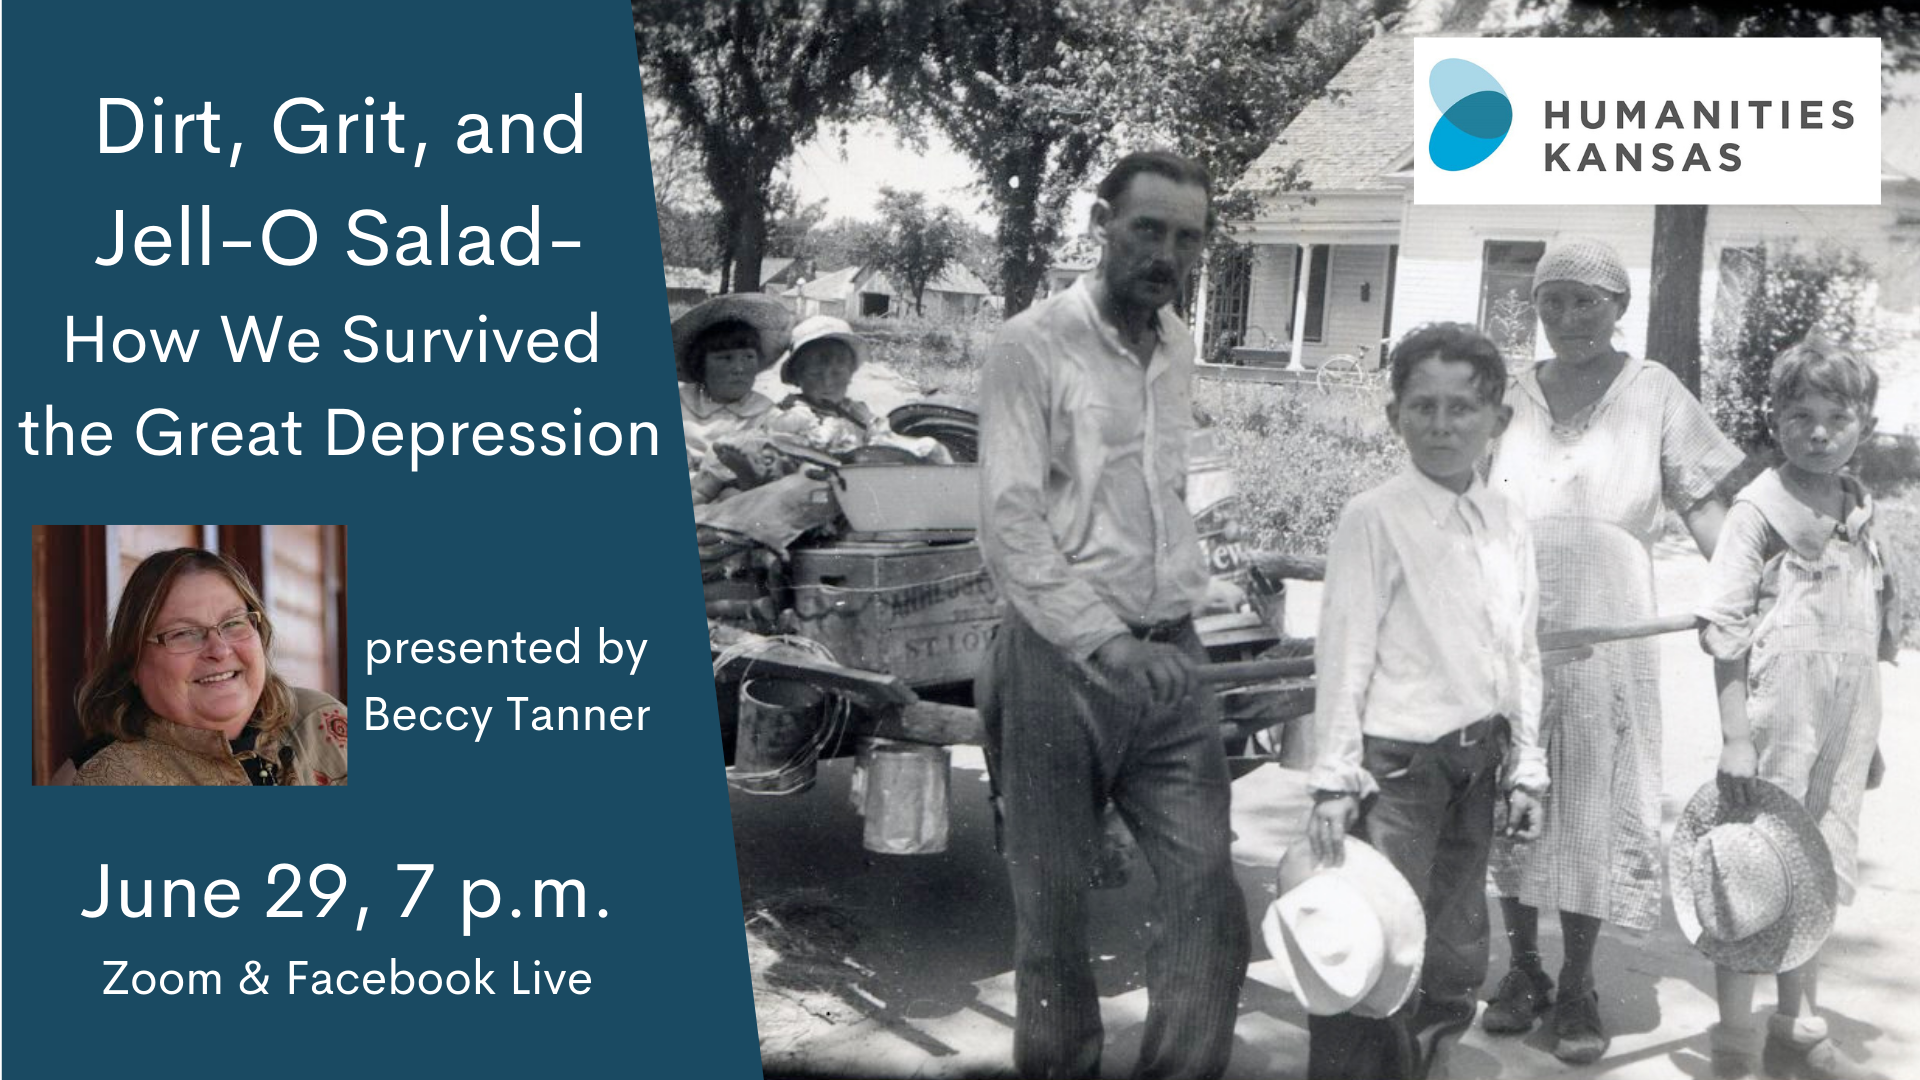 Text: Dirt, Grit, and Jello-Salad--How We survived the Great Depression. Presented by Beccy Tanner. June 29, 7 p.m. Zoom and Facebook Live. Images include a woman with shoulder-length hair and glasses (Beccy Tanner), and a family of itinerant workers dressed in 1930s clothing, holding hats. Two small children sit in a makeshift wagon.